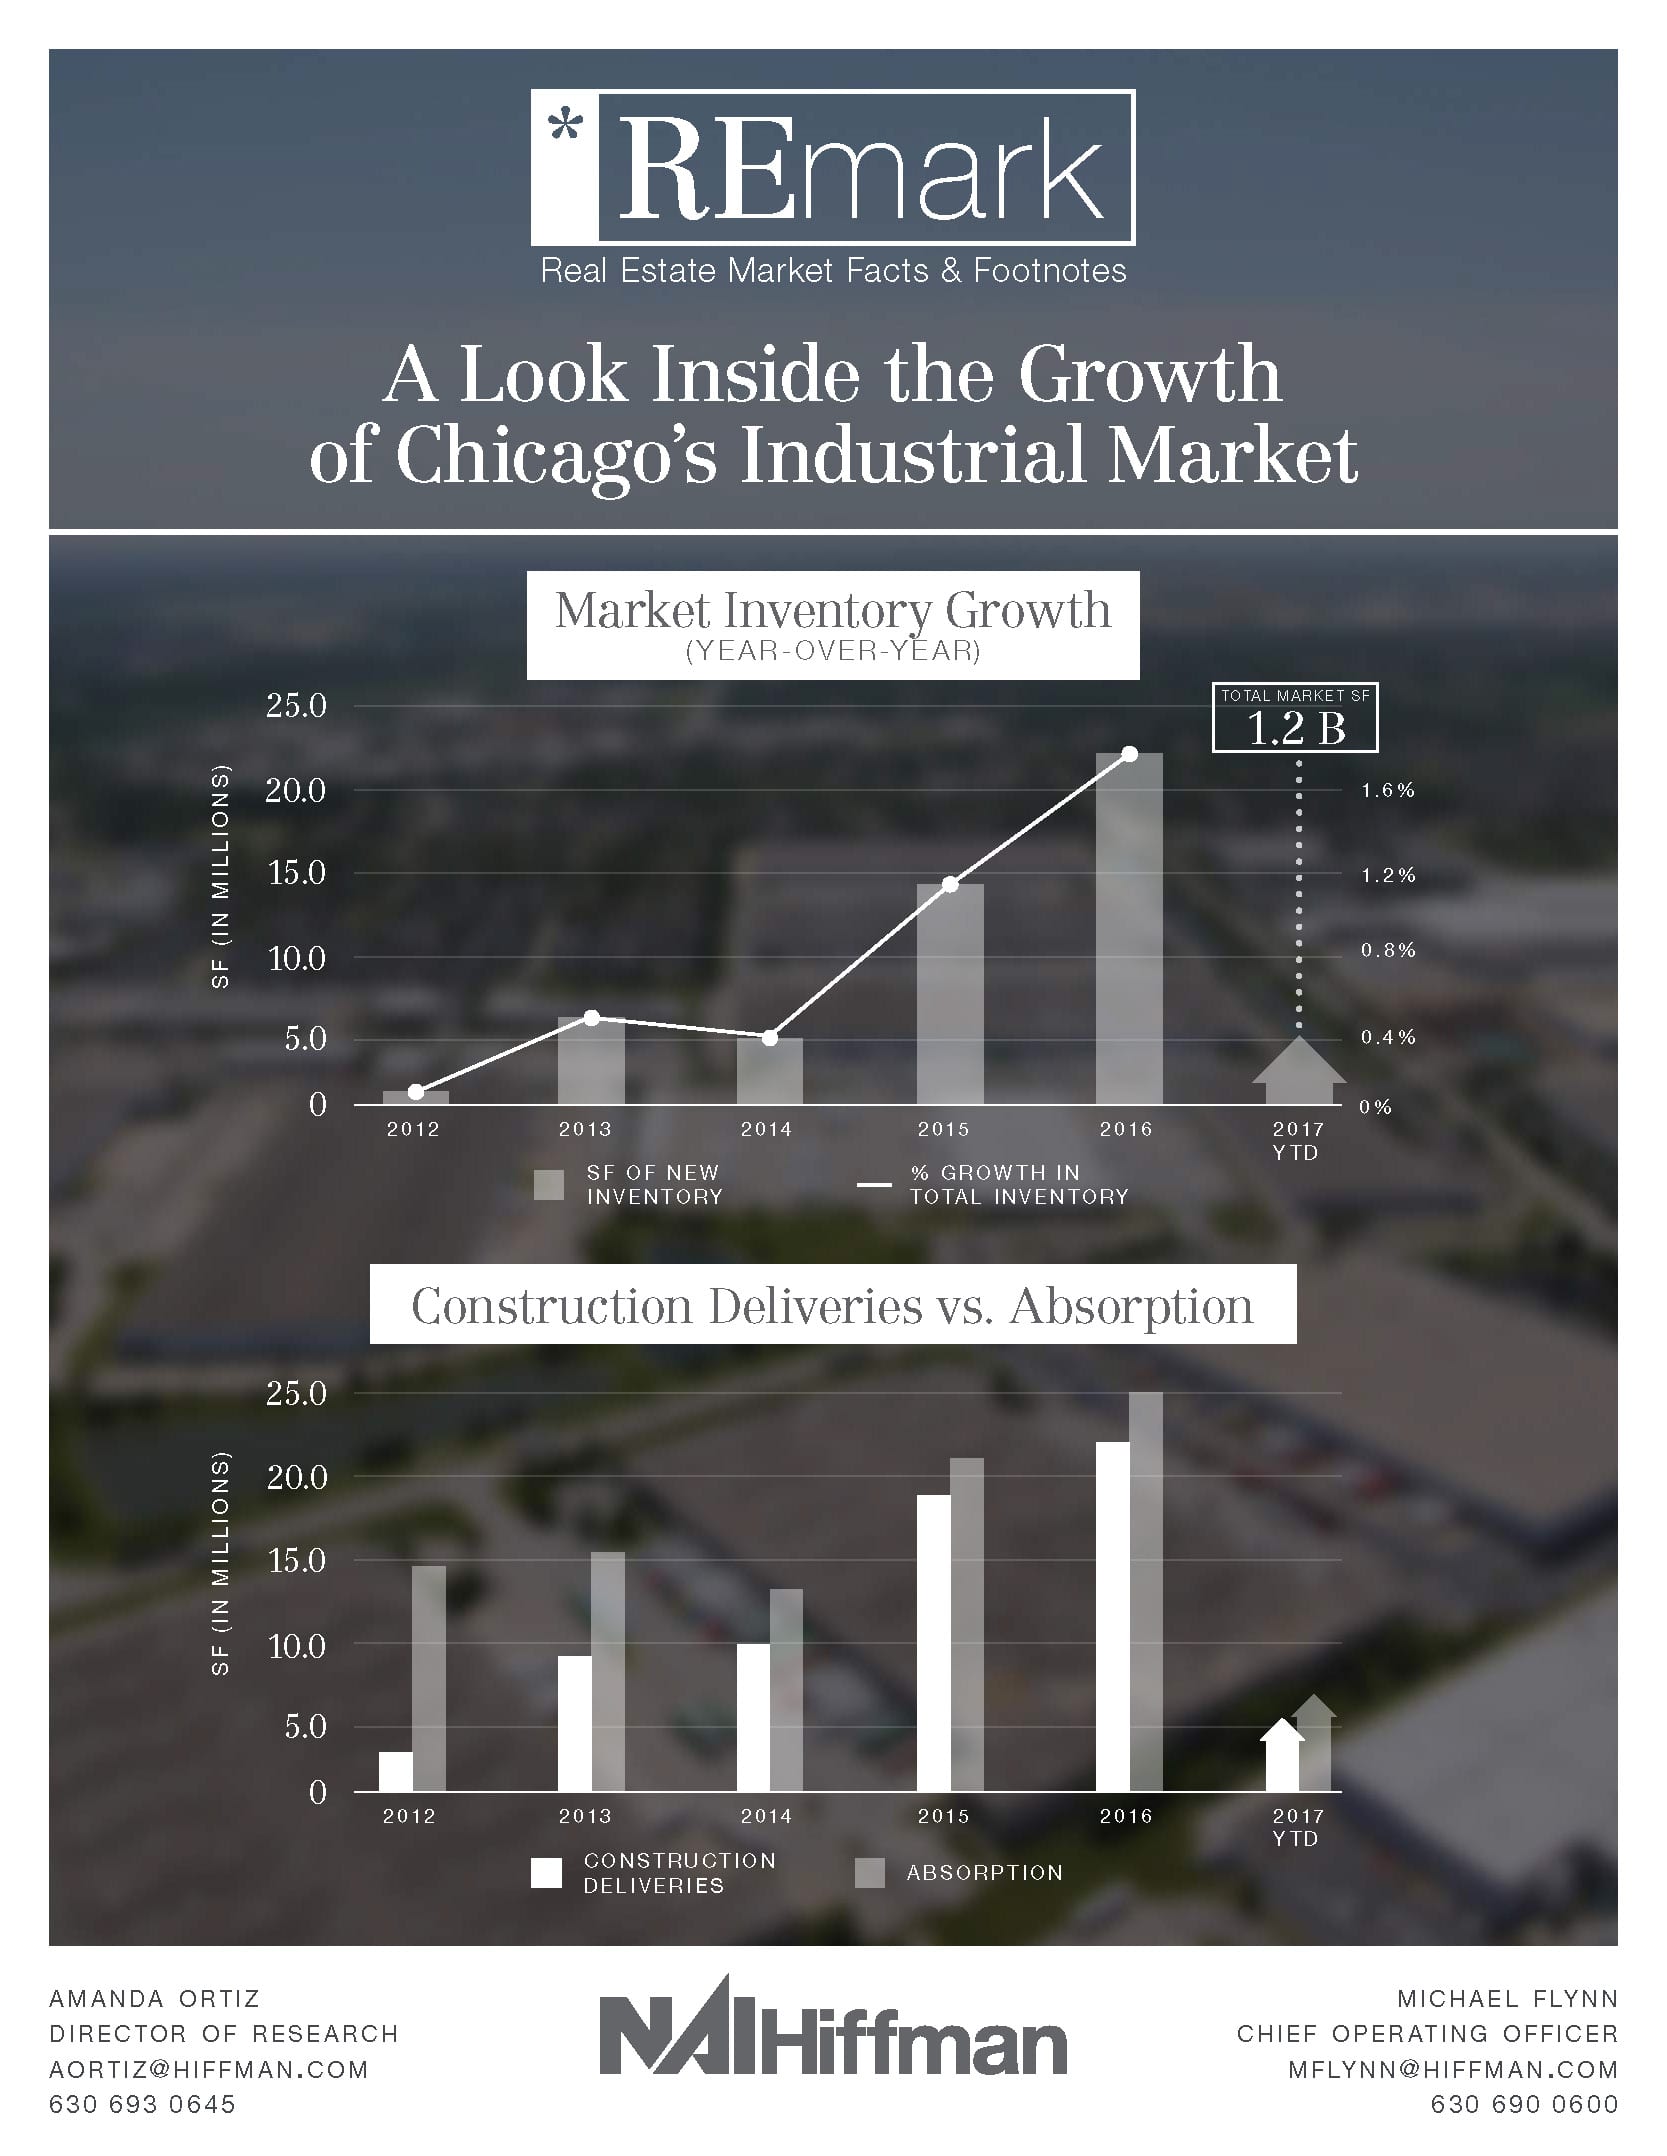 REmark: A Look Inside the Growth of Chicago’s Industrial Market